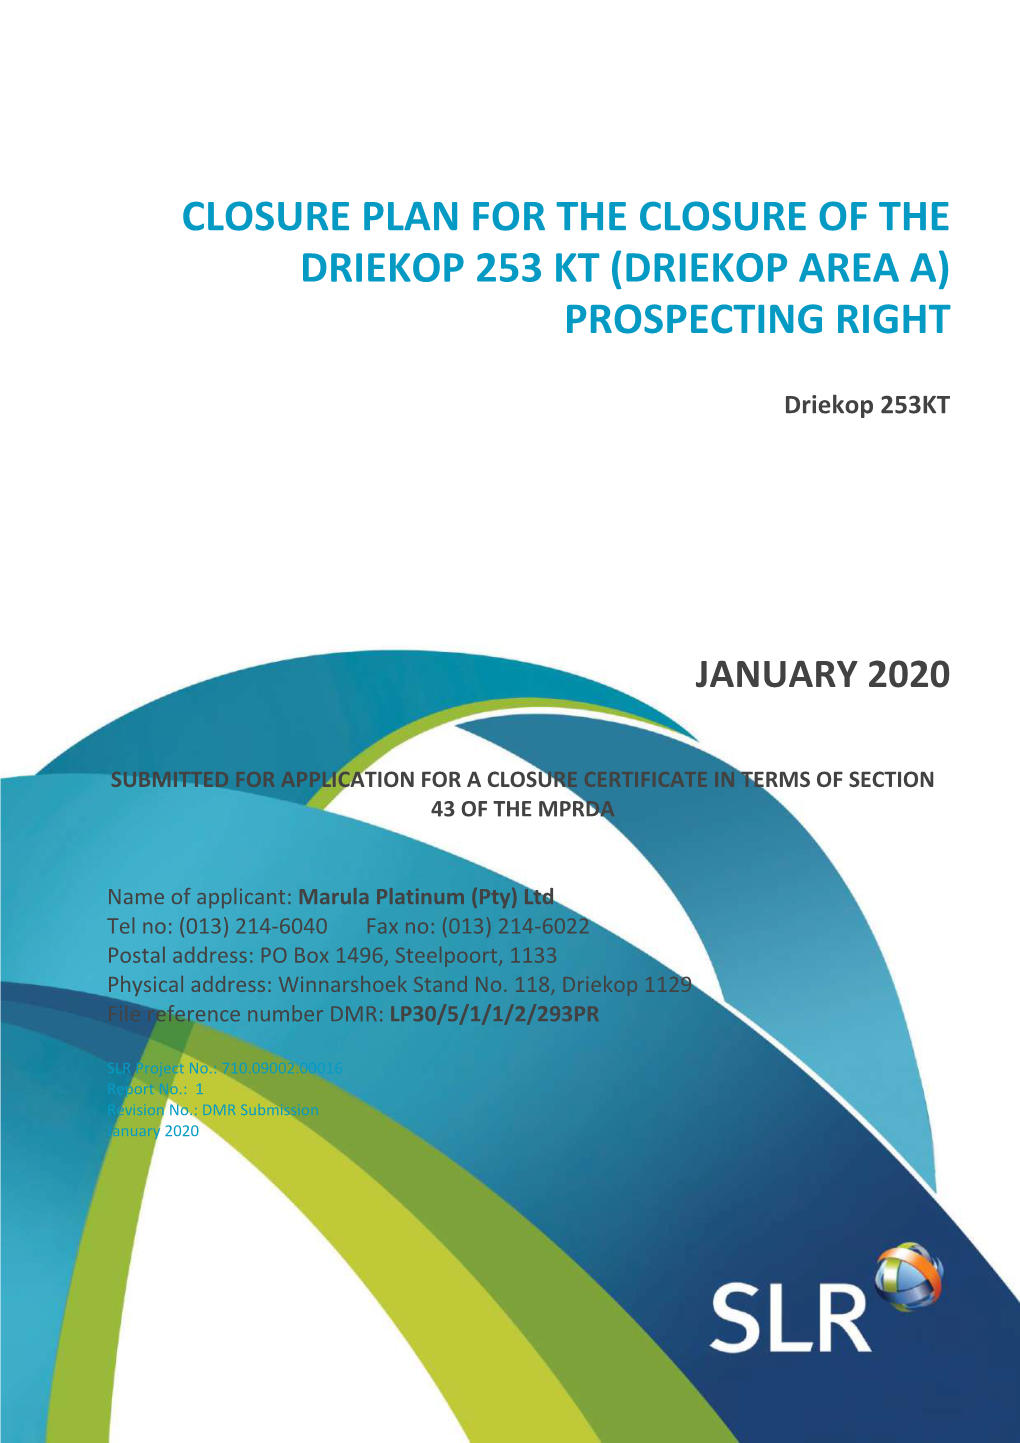 Closure Plan for the Closure of the Driekop 253 Kt (Driekop Area A) Prospecting Right